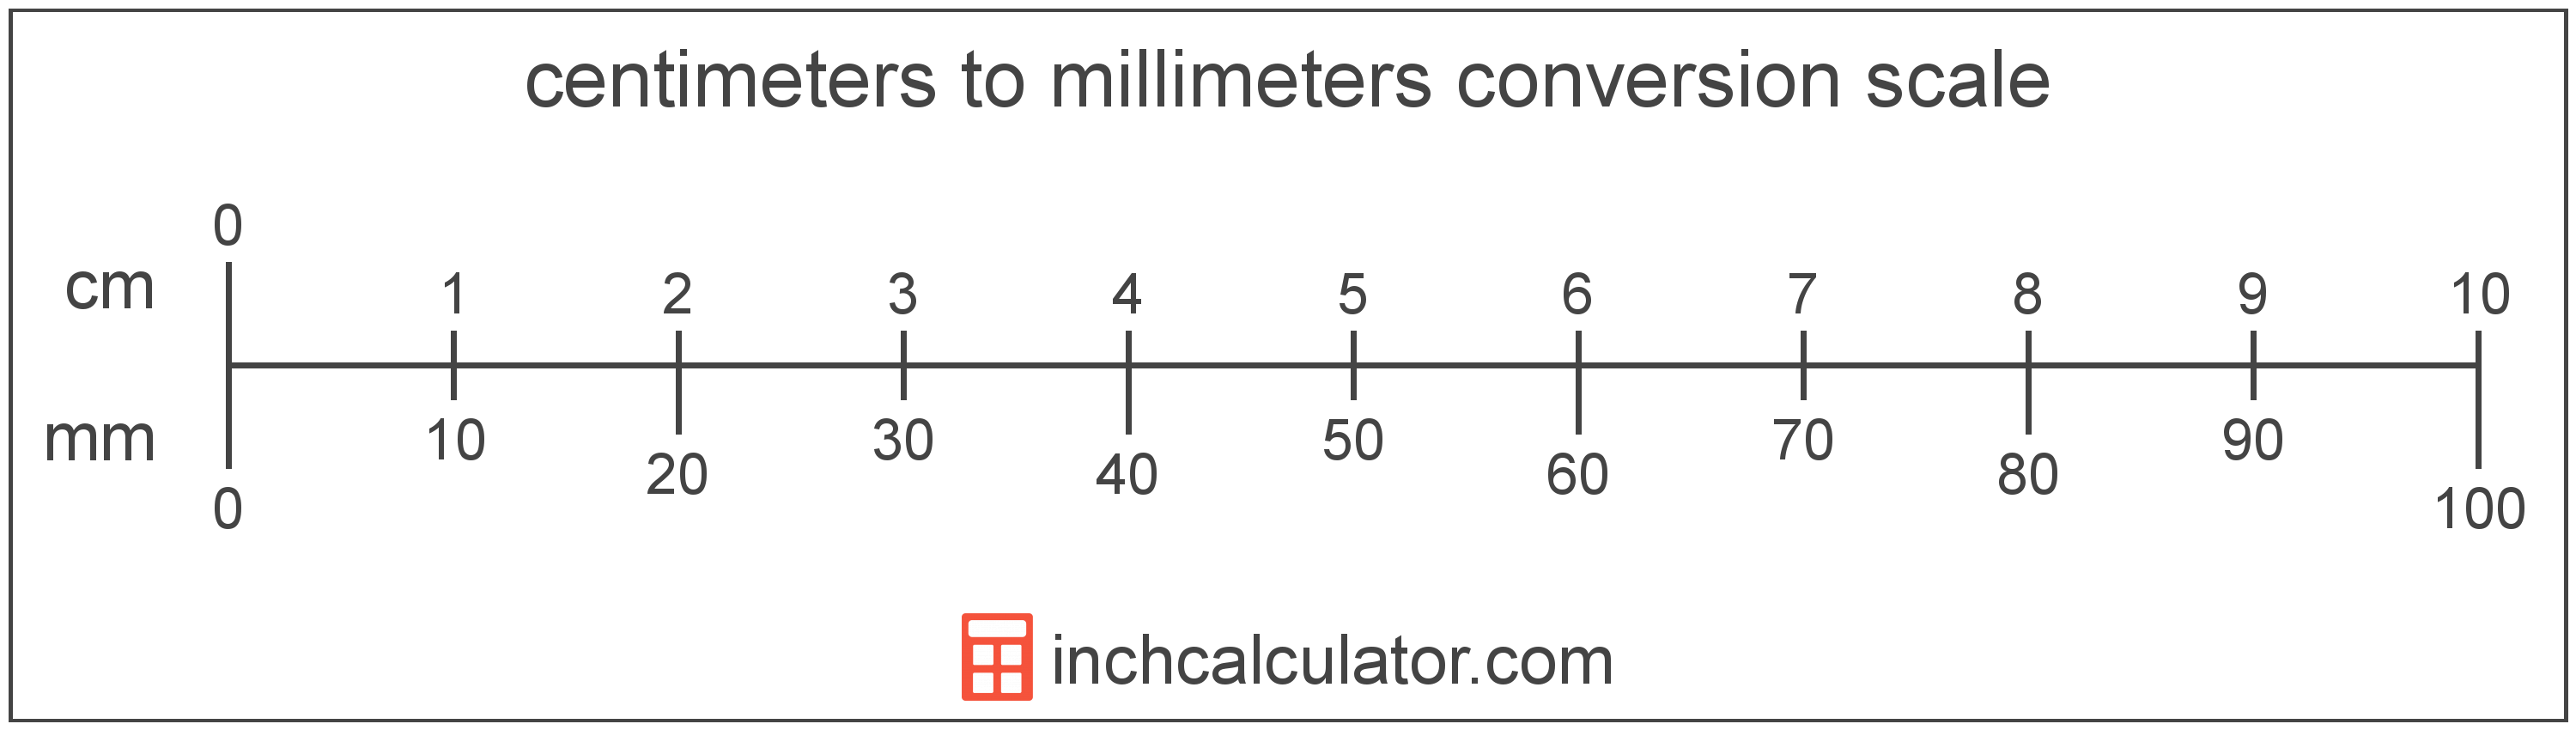 conversion scale showing millimeters and equivalent centimeters length values